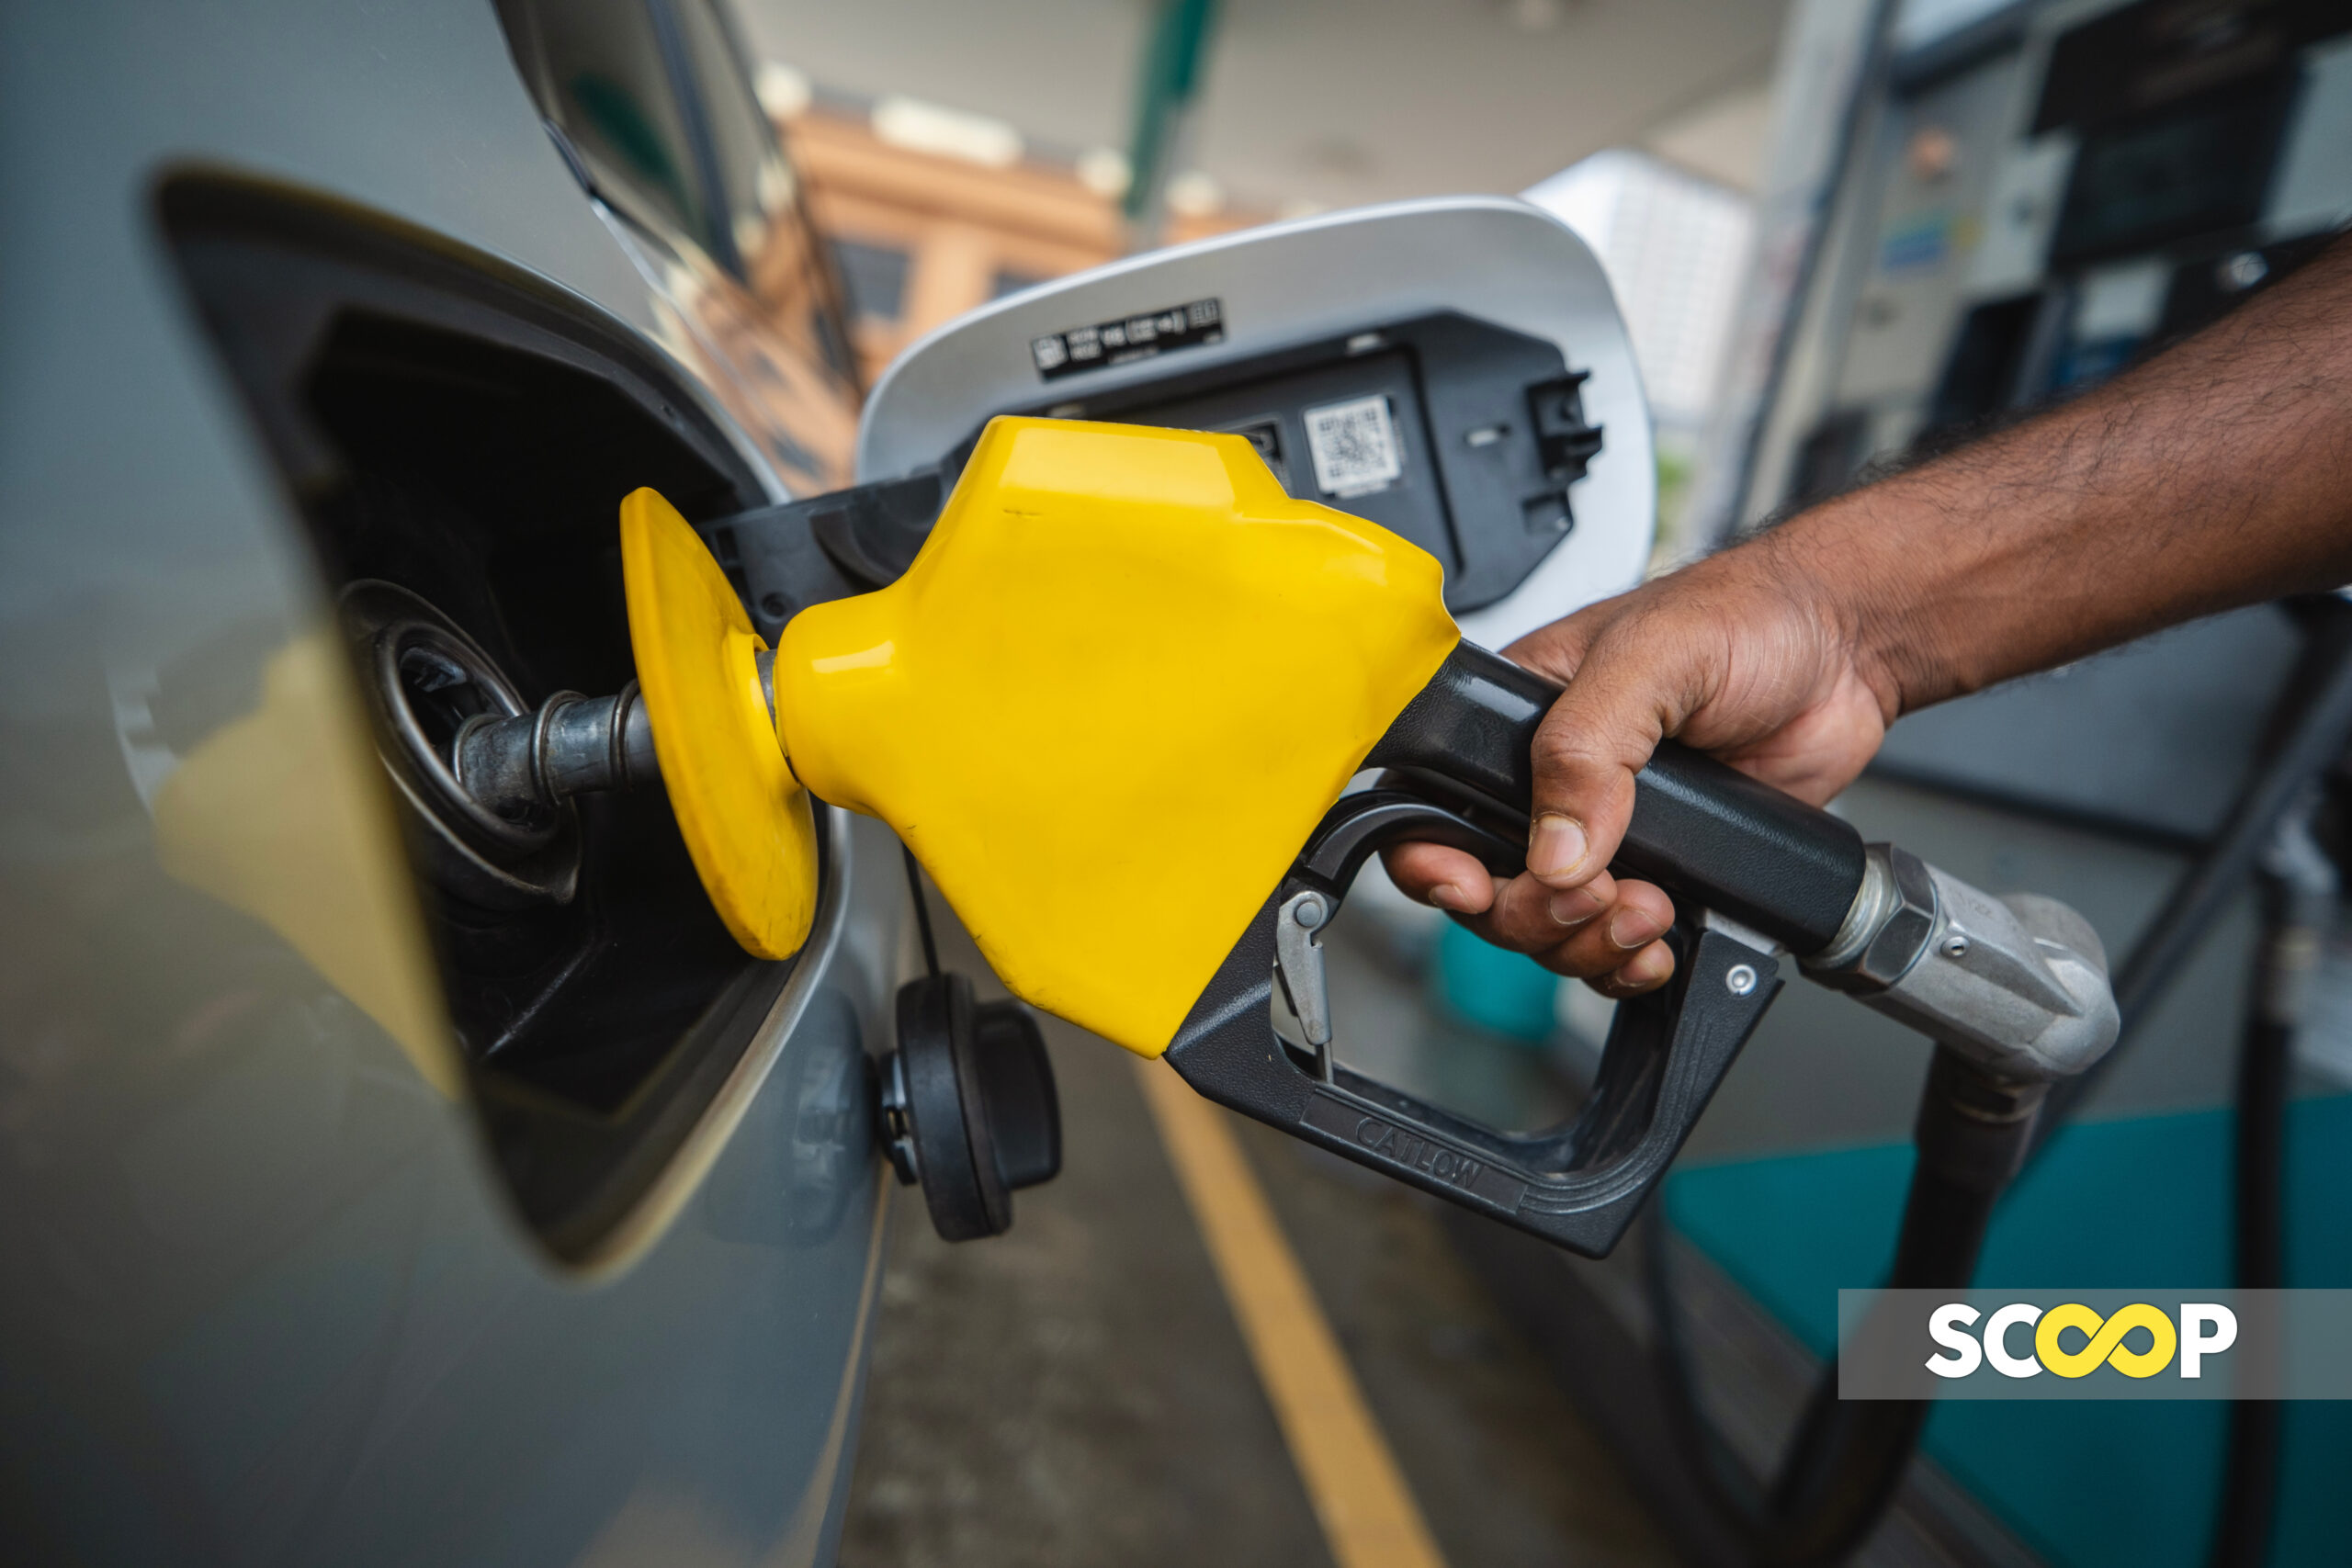 RON97, RON95, and diesel prices will remain unchanged until Jan 3